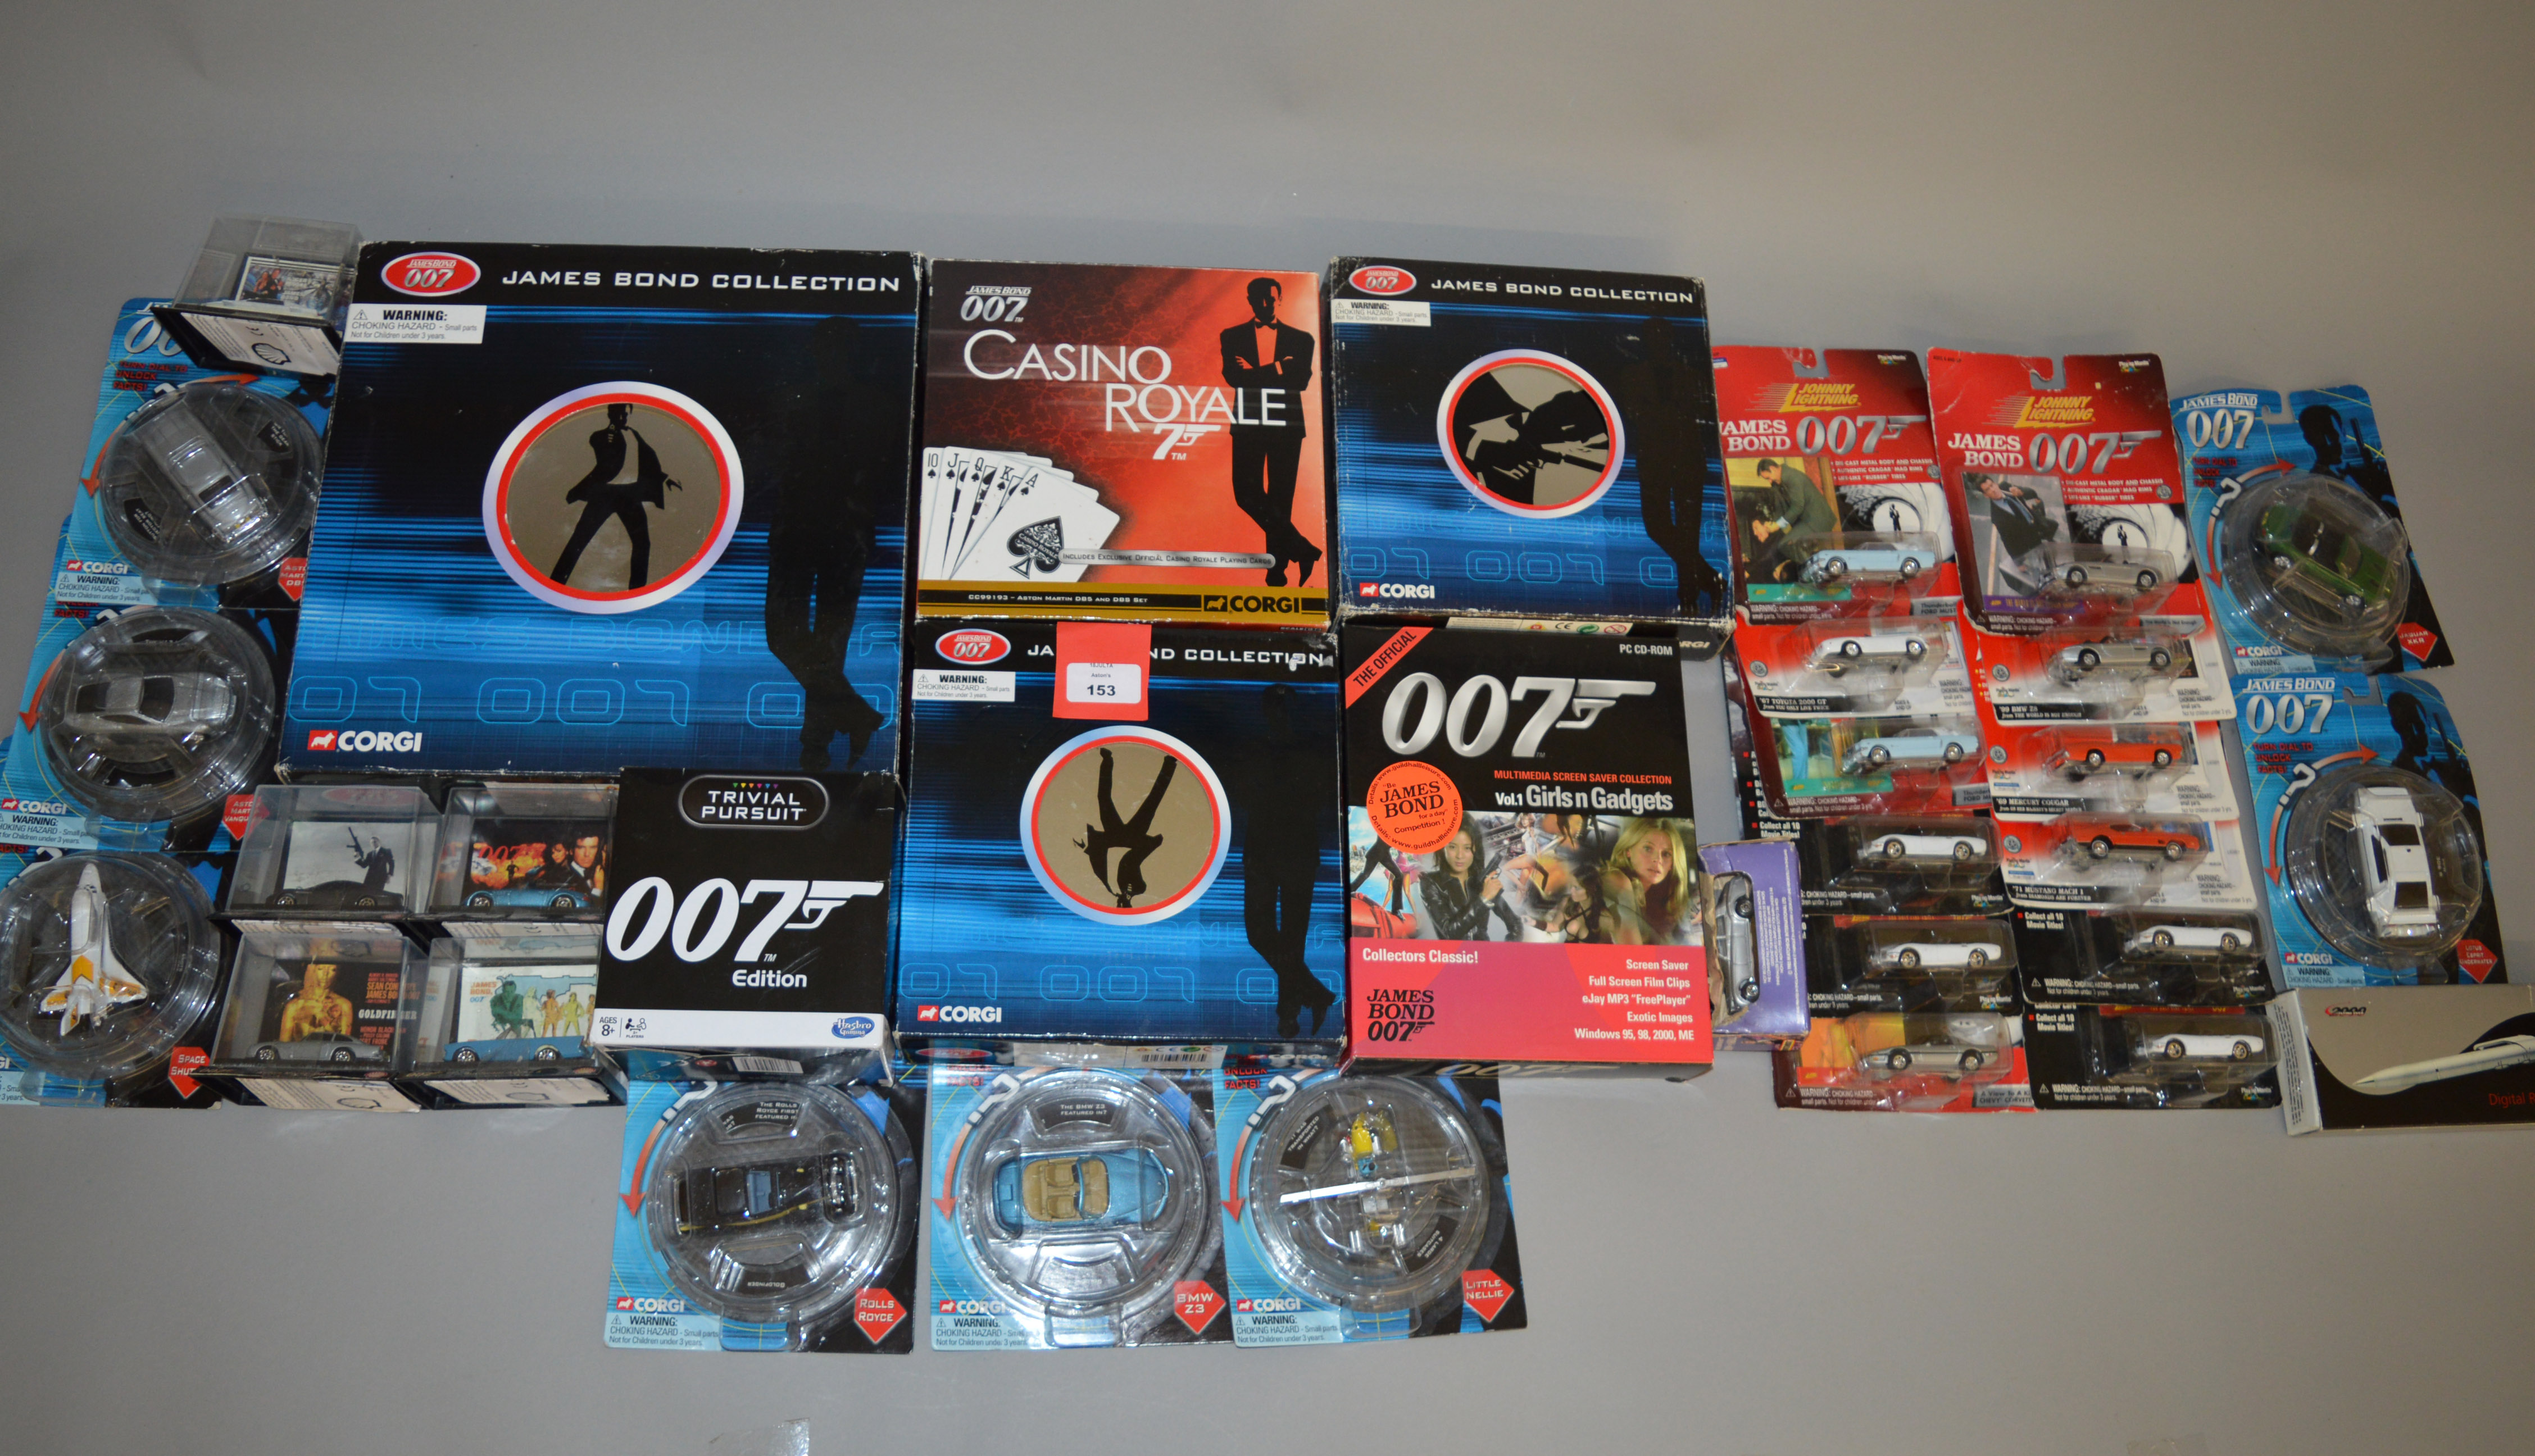 A good quantity of James Bond related diecast models, by Corgi, Johnny Lightning and others.